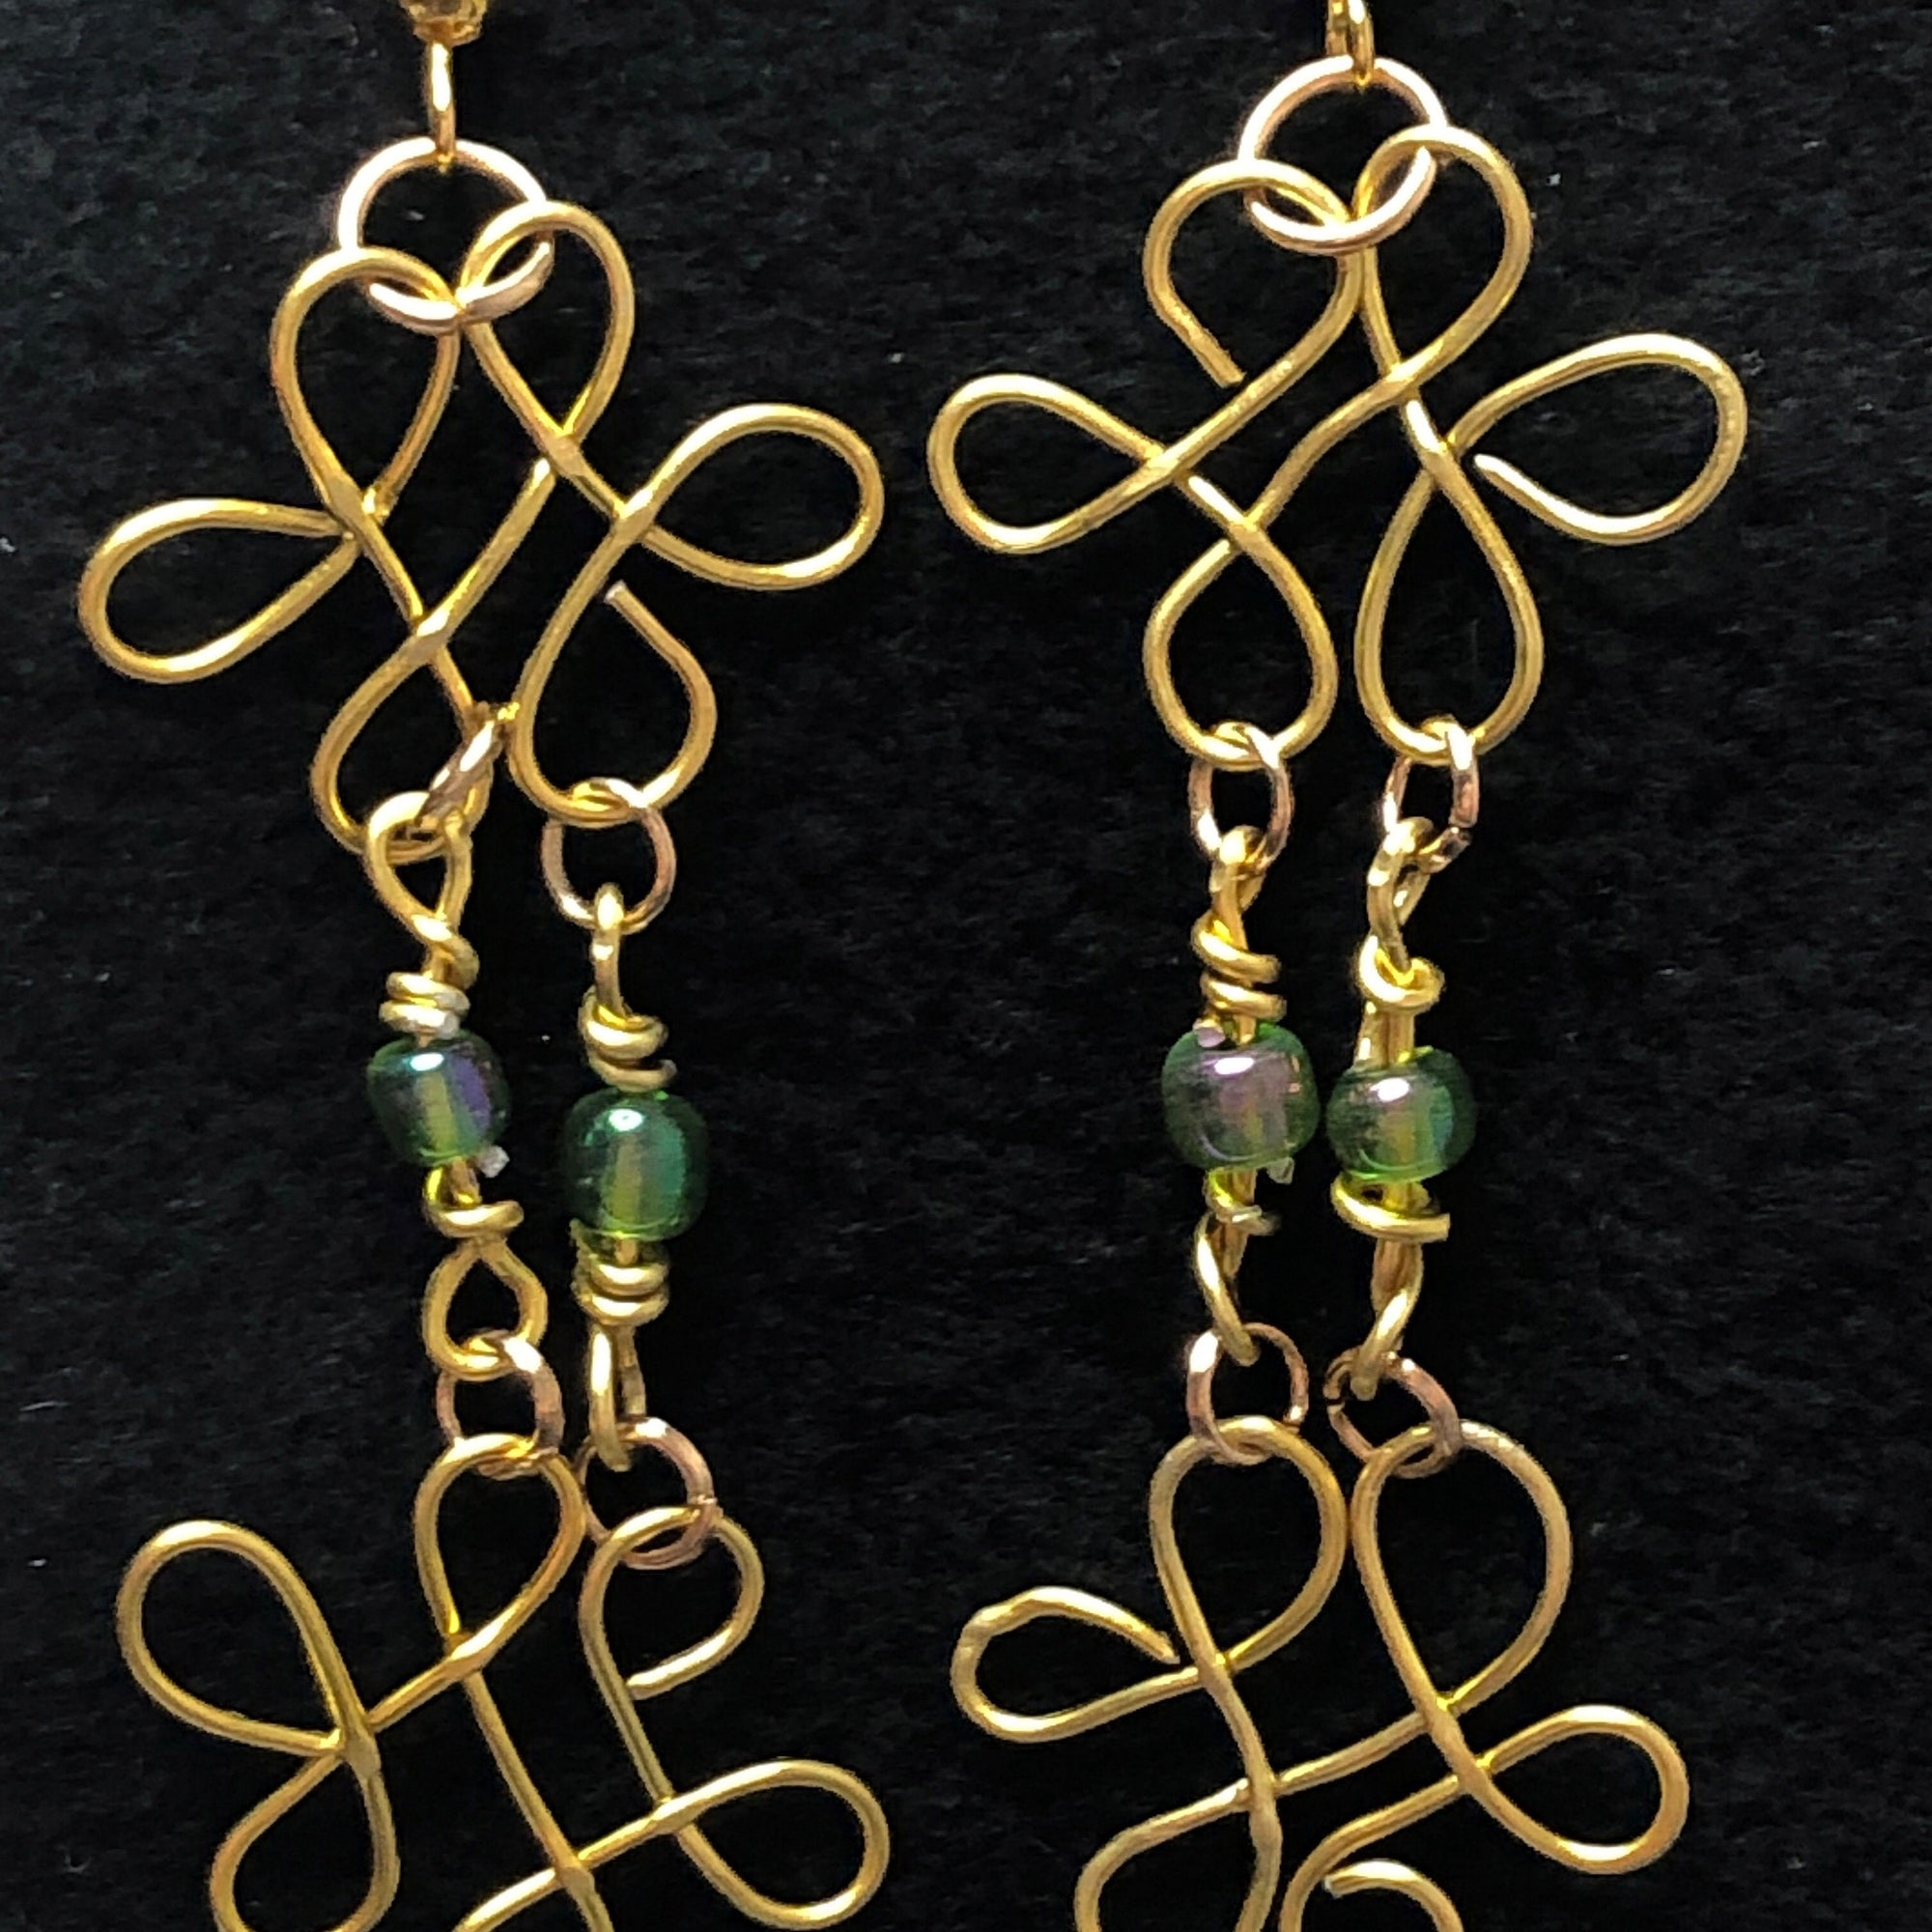 Stunning 14k Gold Filled Keltic Knot Earrings with Colorful Glass Beads for Women